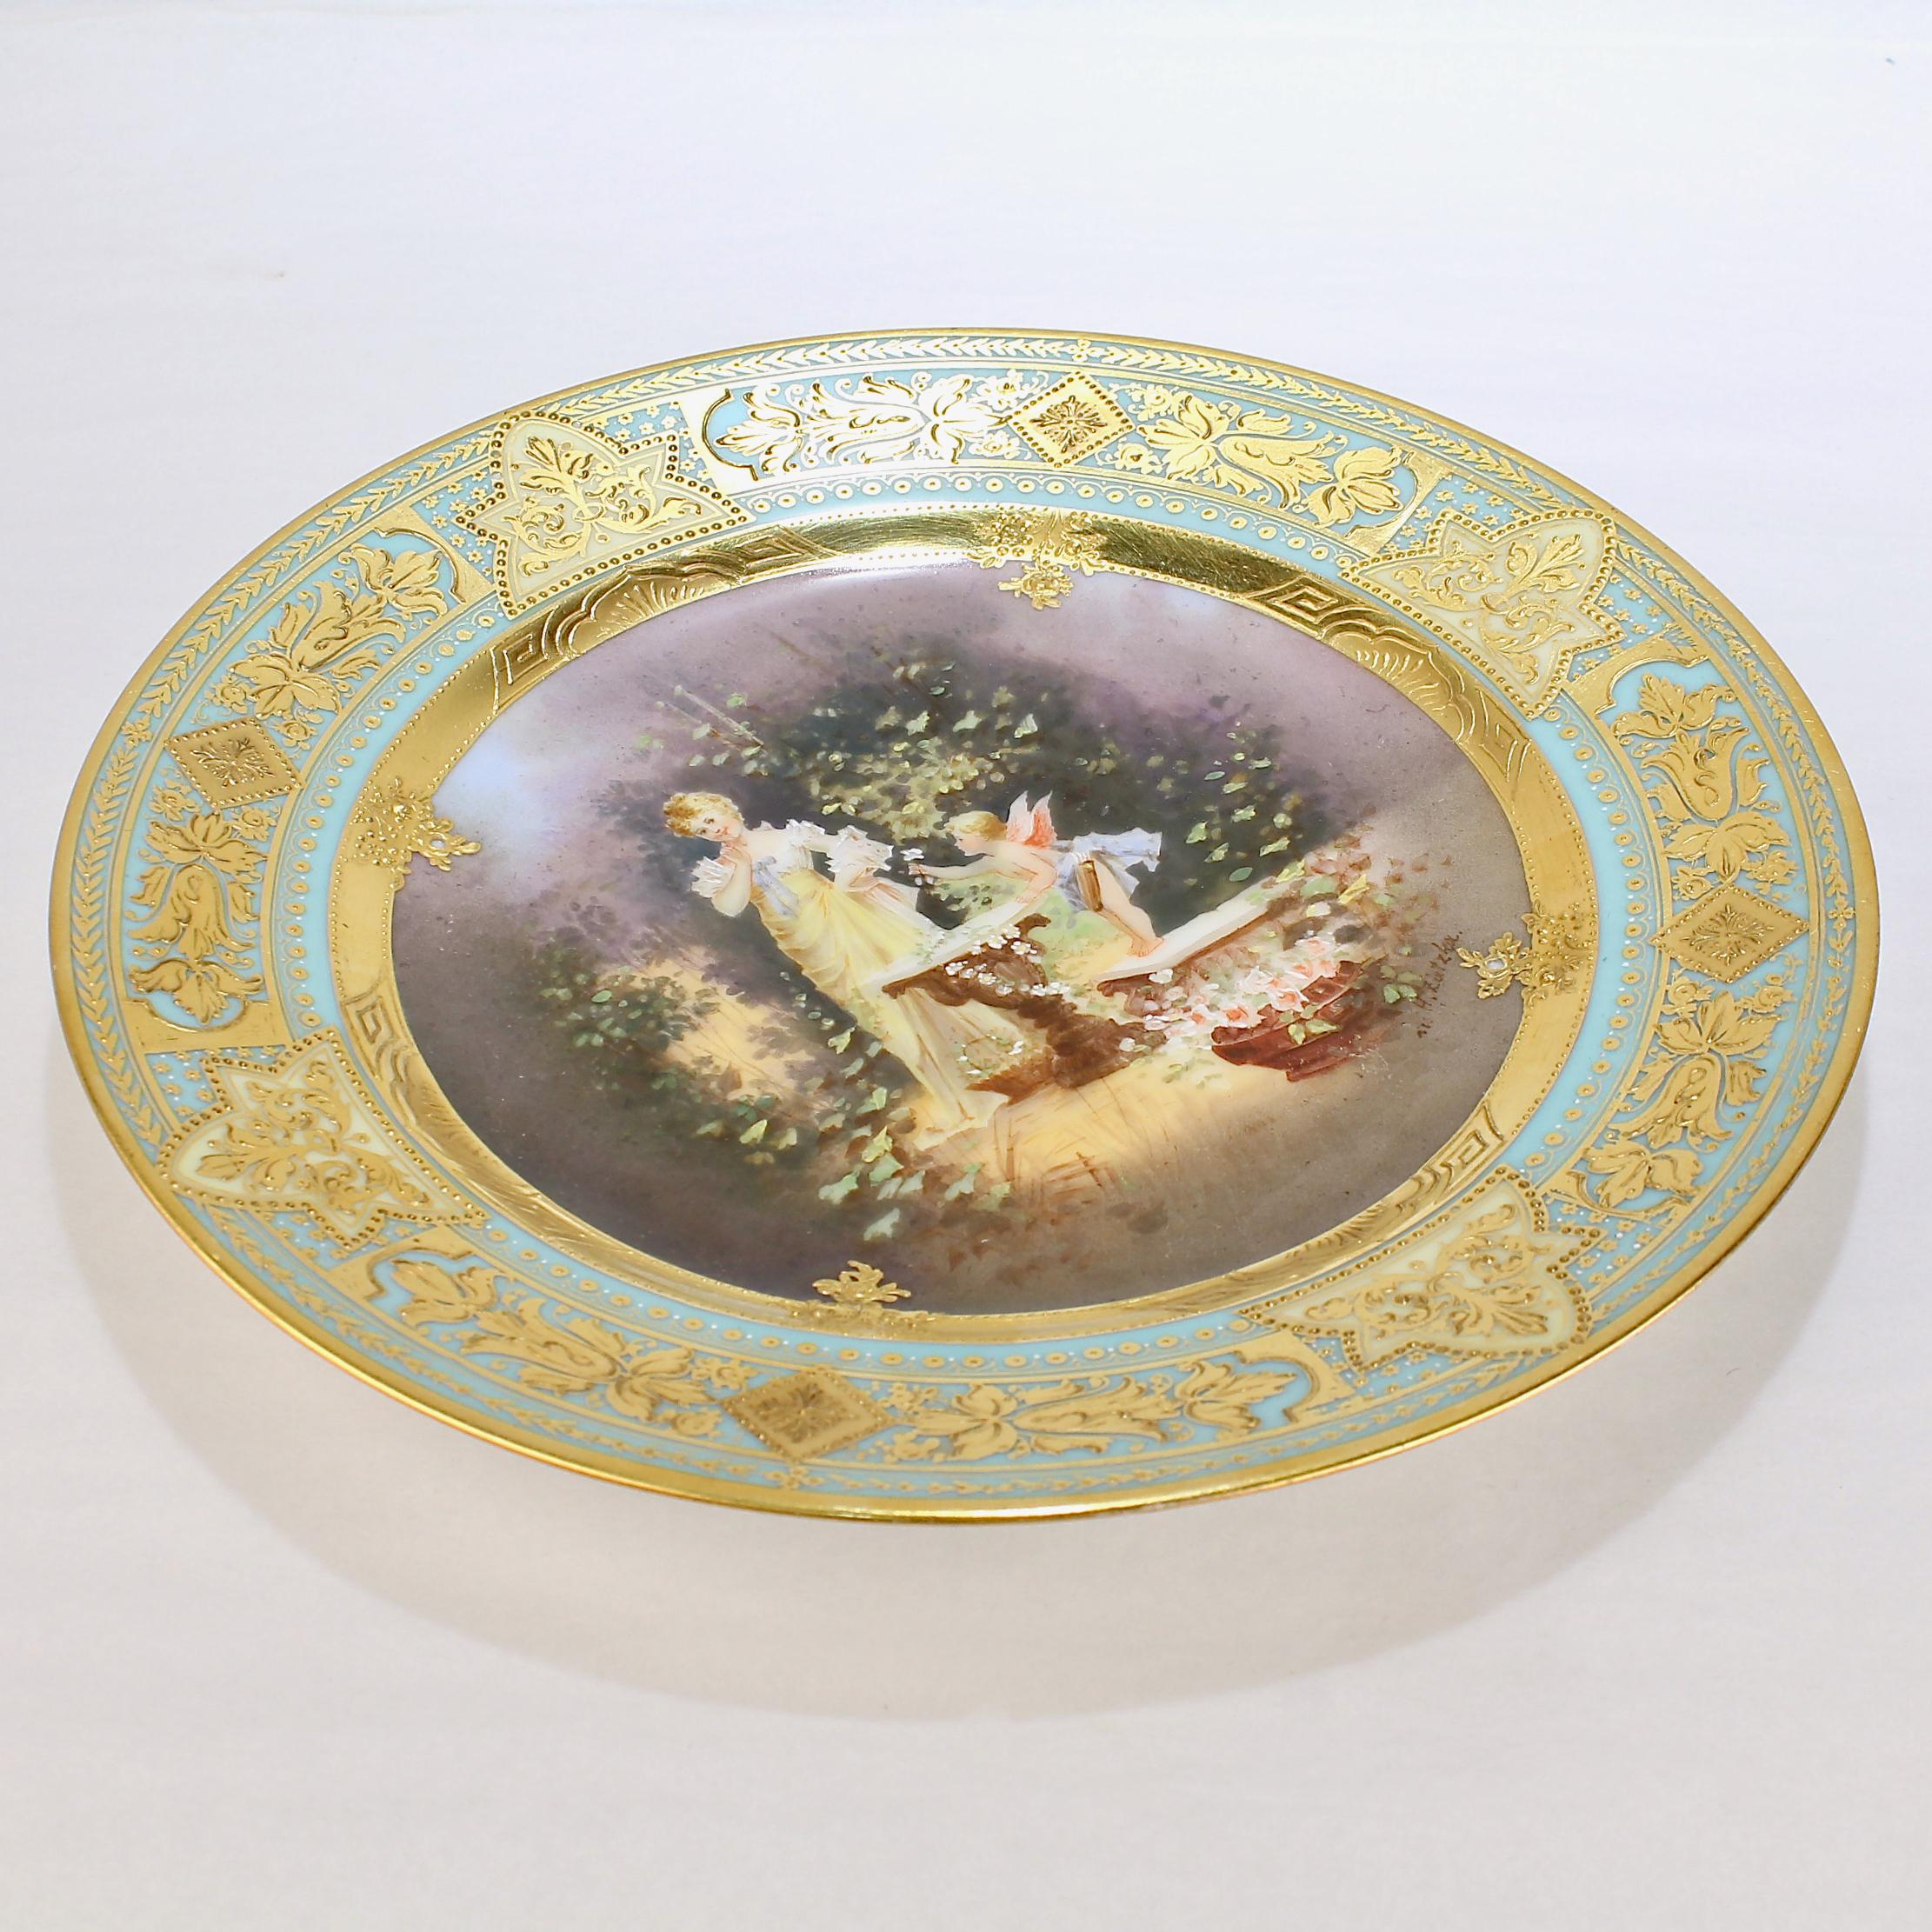 A very fine antique Vienna style porcelain cabinet plate.

Entitled 